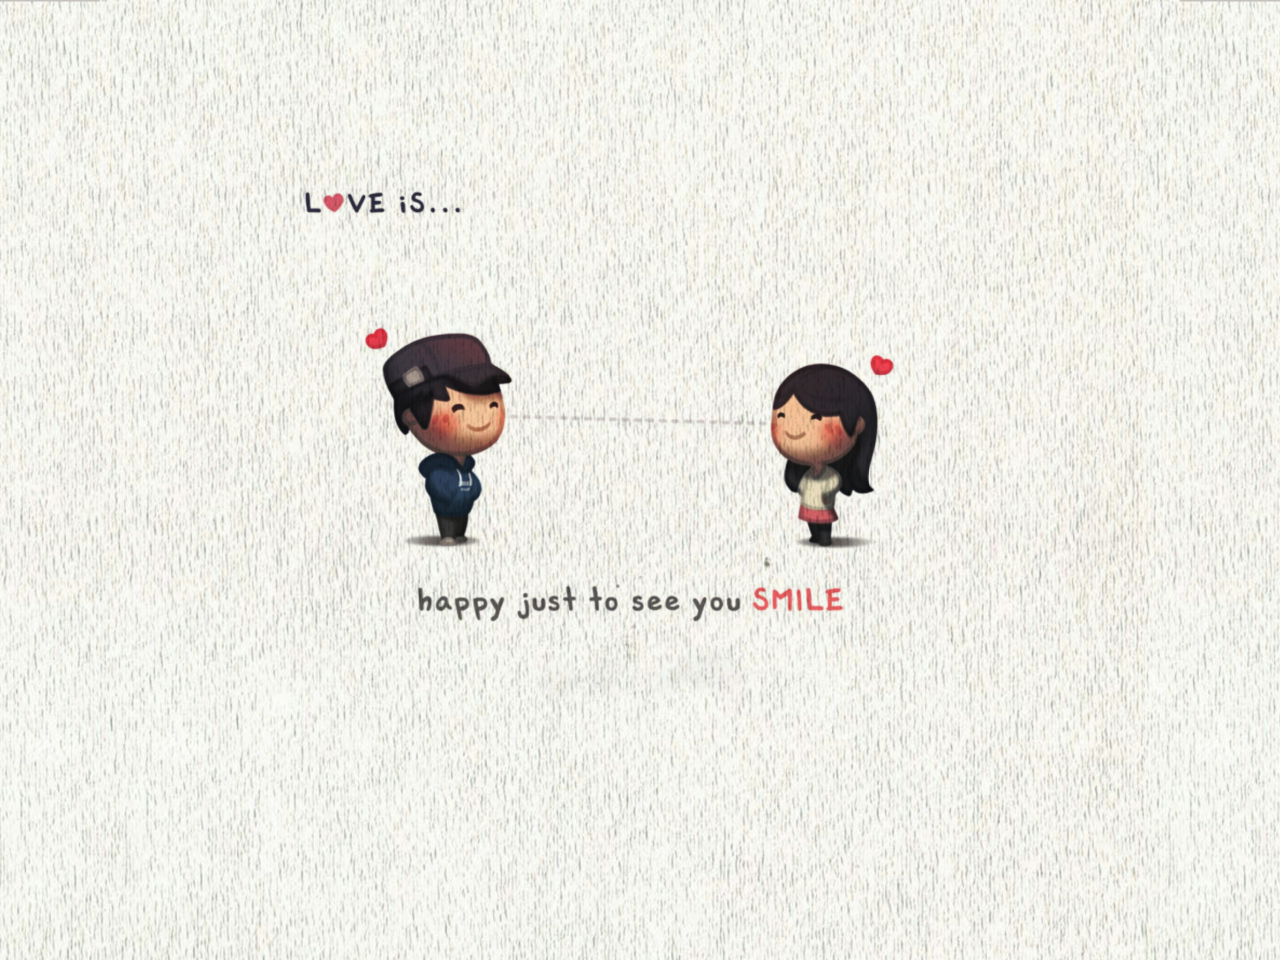 Das Love Is Happy Just To See You Smile Wallpaper 1280x960